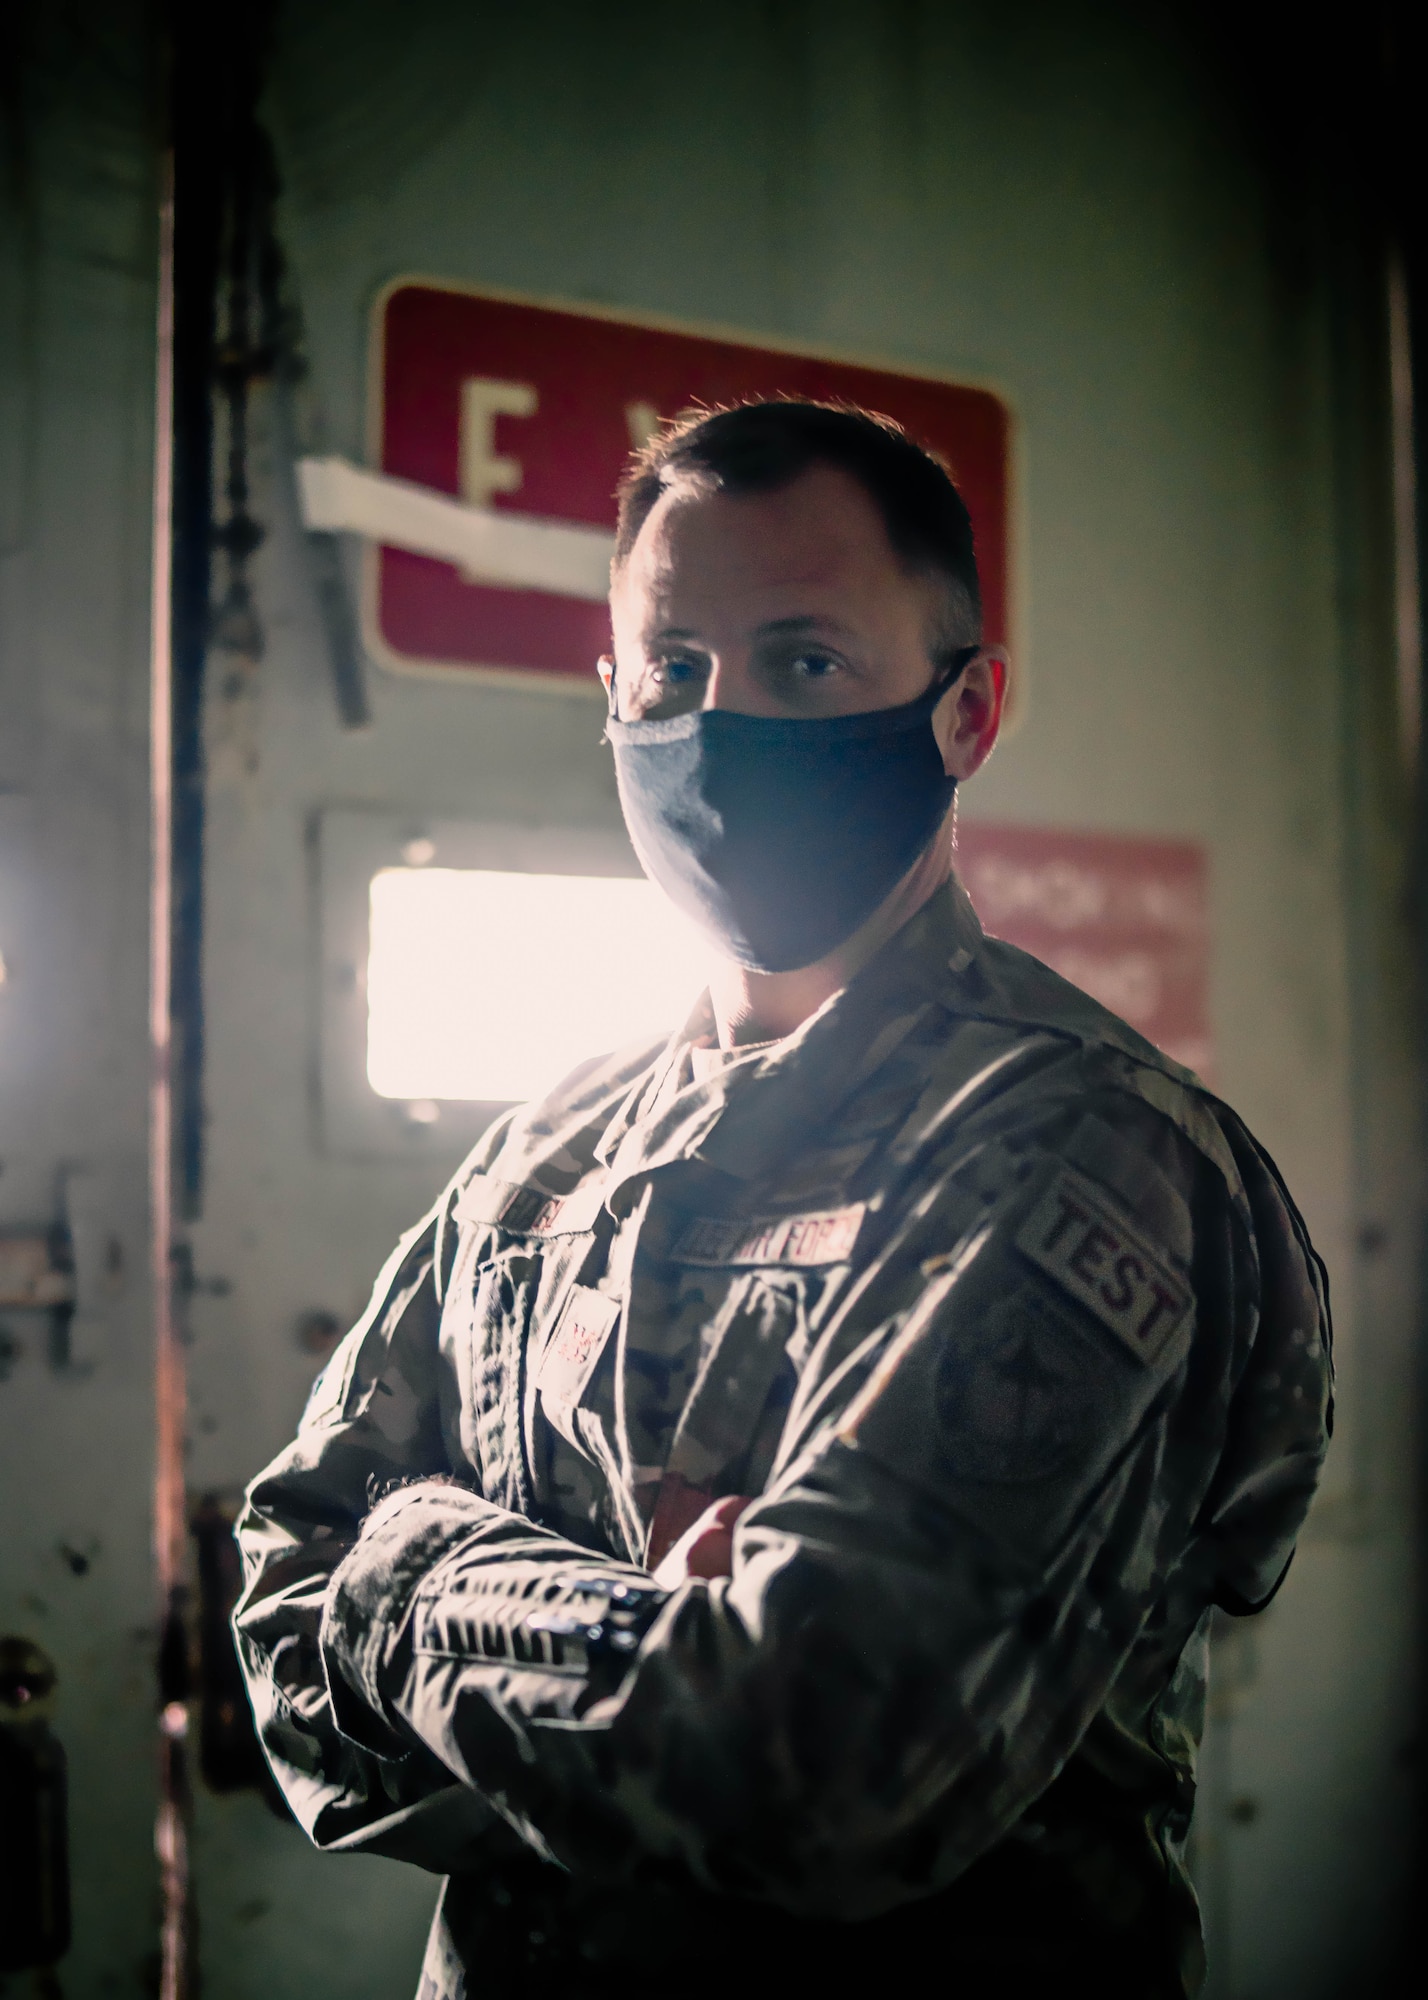 Col. Nick Hague pictured inside the Manzano Mountain complex, one of Air Force Research Laboratory’s controlled test environments.(U.S. Air Force photo/Macee Hunt)